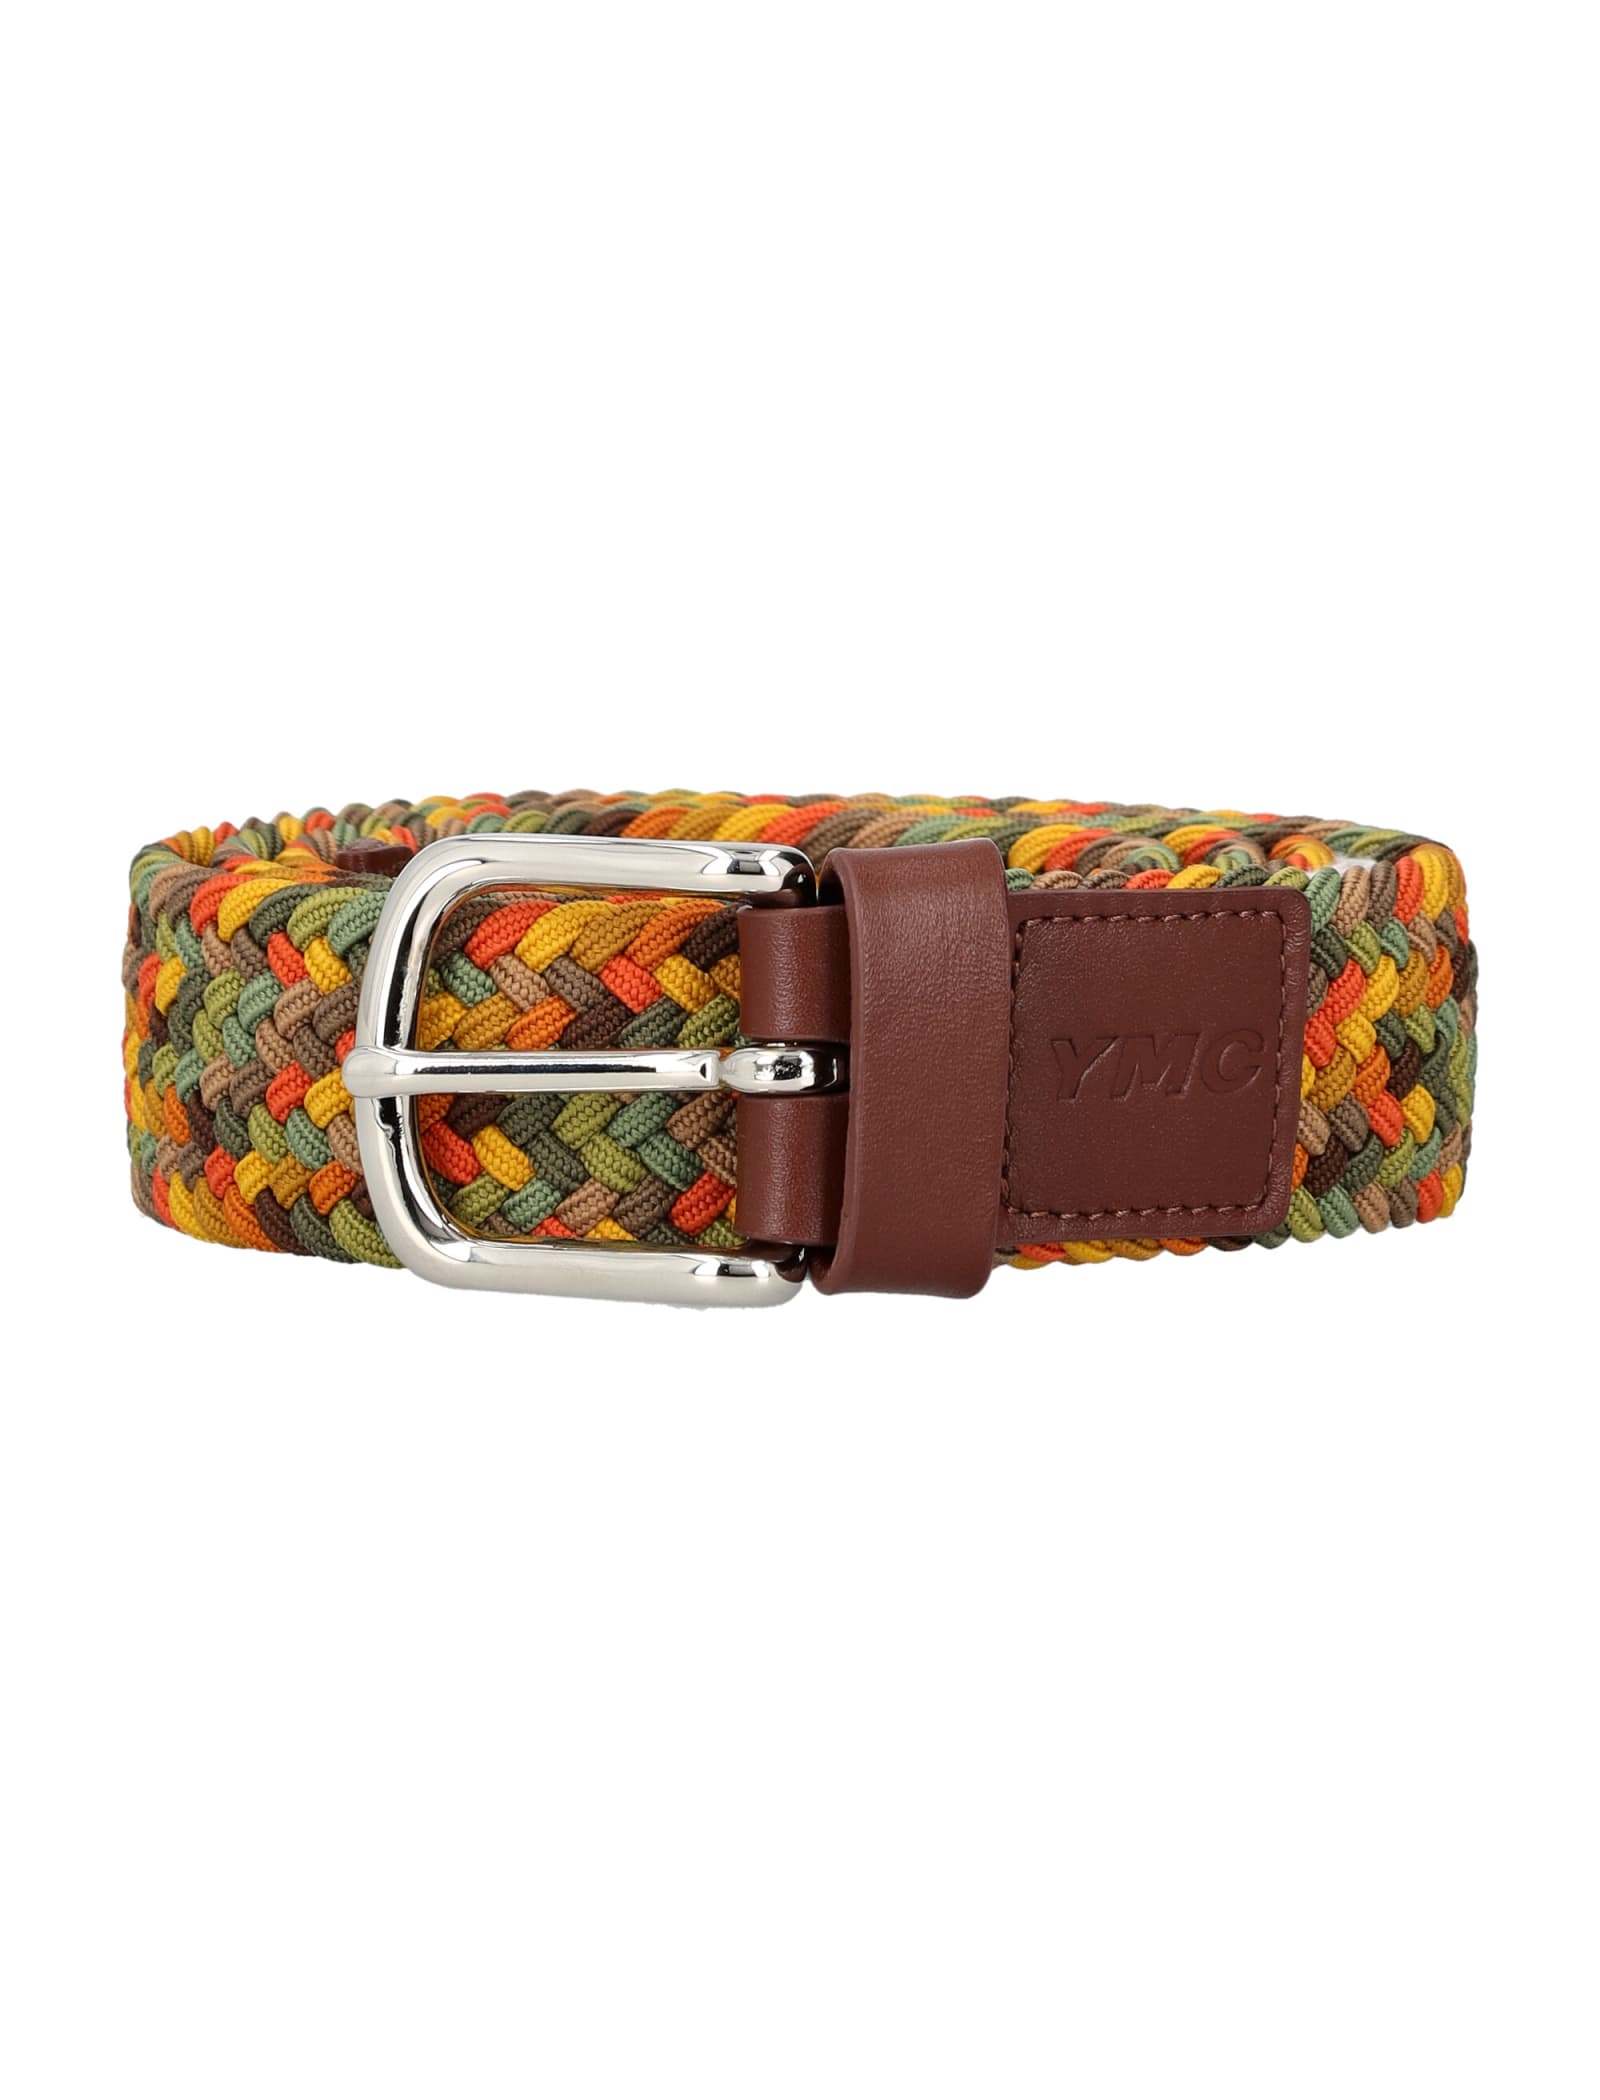 Shop Ymc You Must Create Braided Belt In Brown/yellow